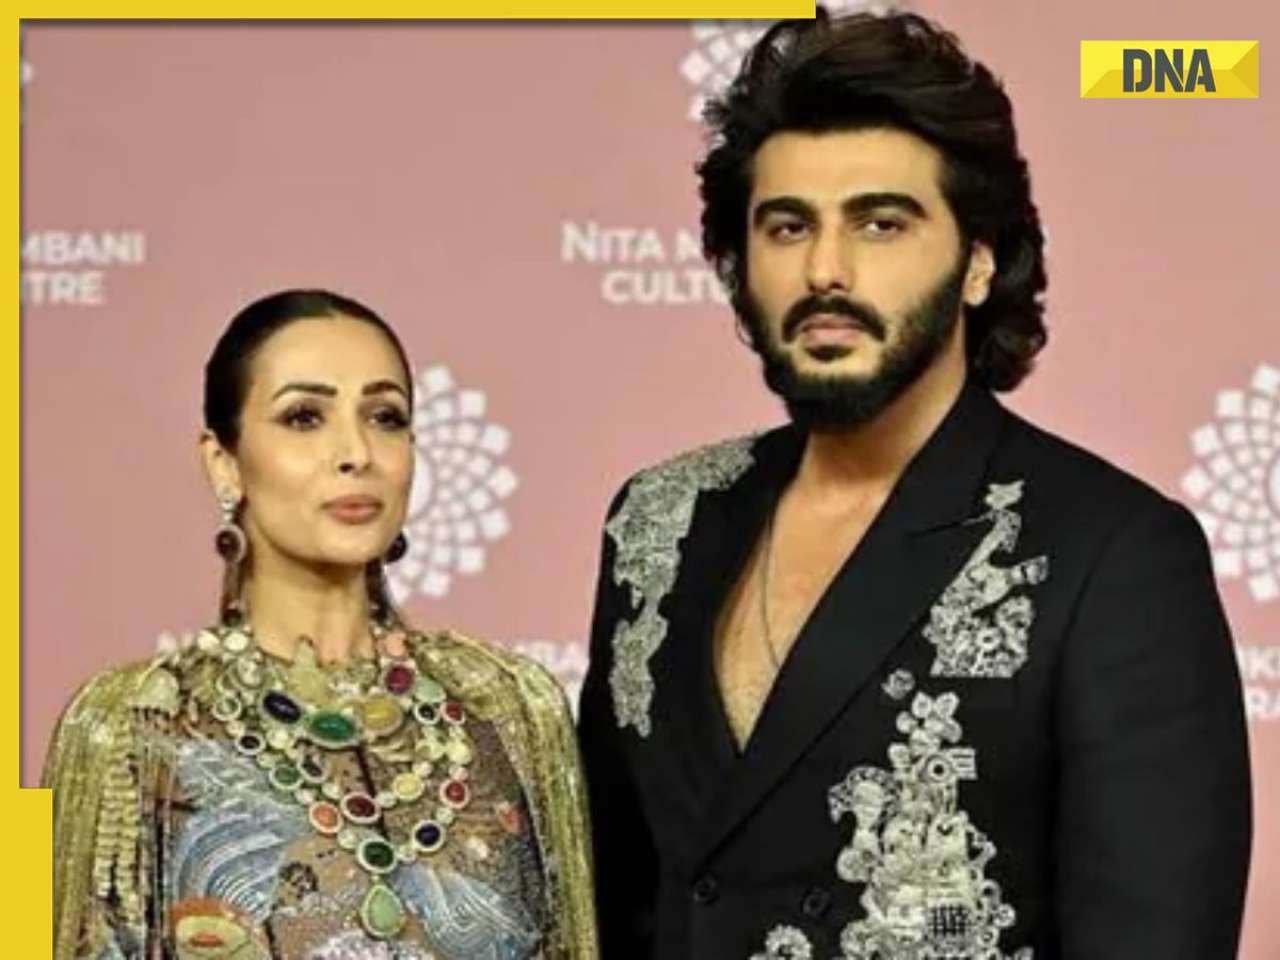 Amid breakup rumours with Malaika Arora, Arjun Kapoor says 'we have two choices in life', shares cryptic post on Insta